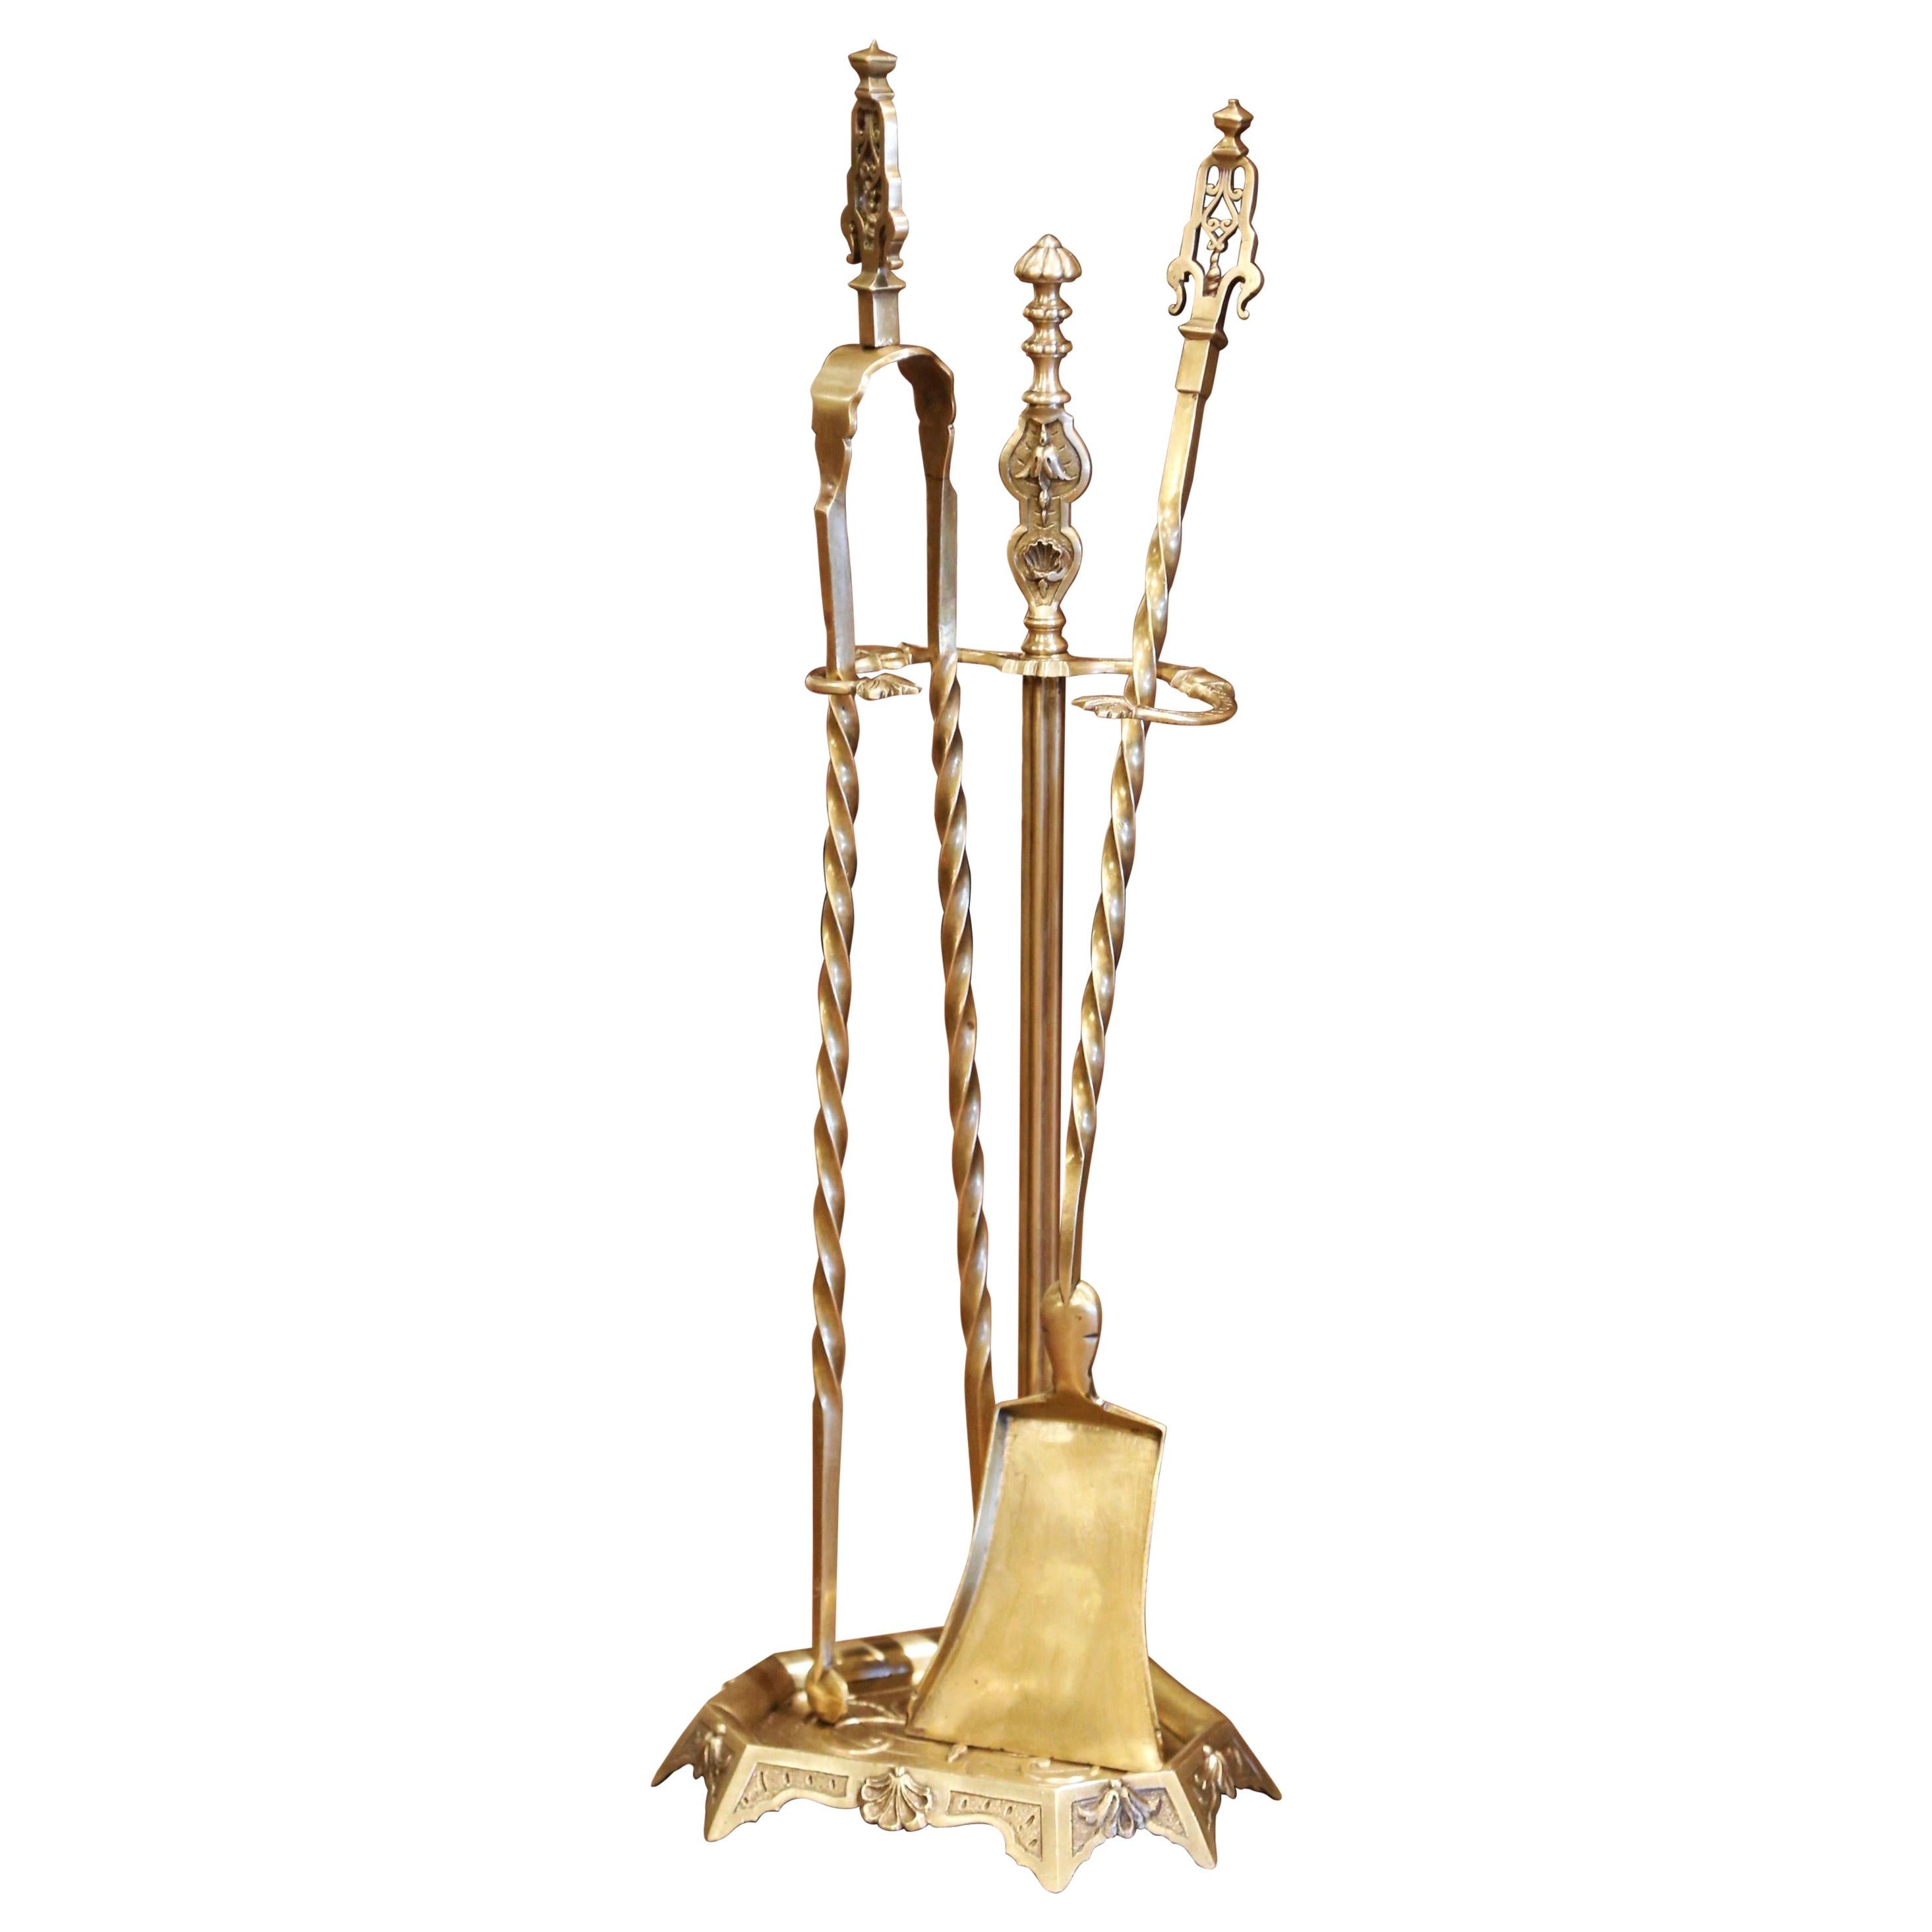 Late 19th Century French Louis XVI Gilt Bronze Fireplace Tool Set on Stand